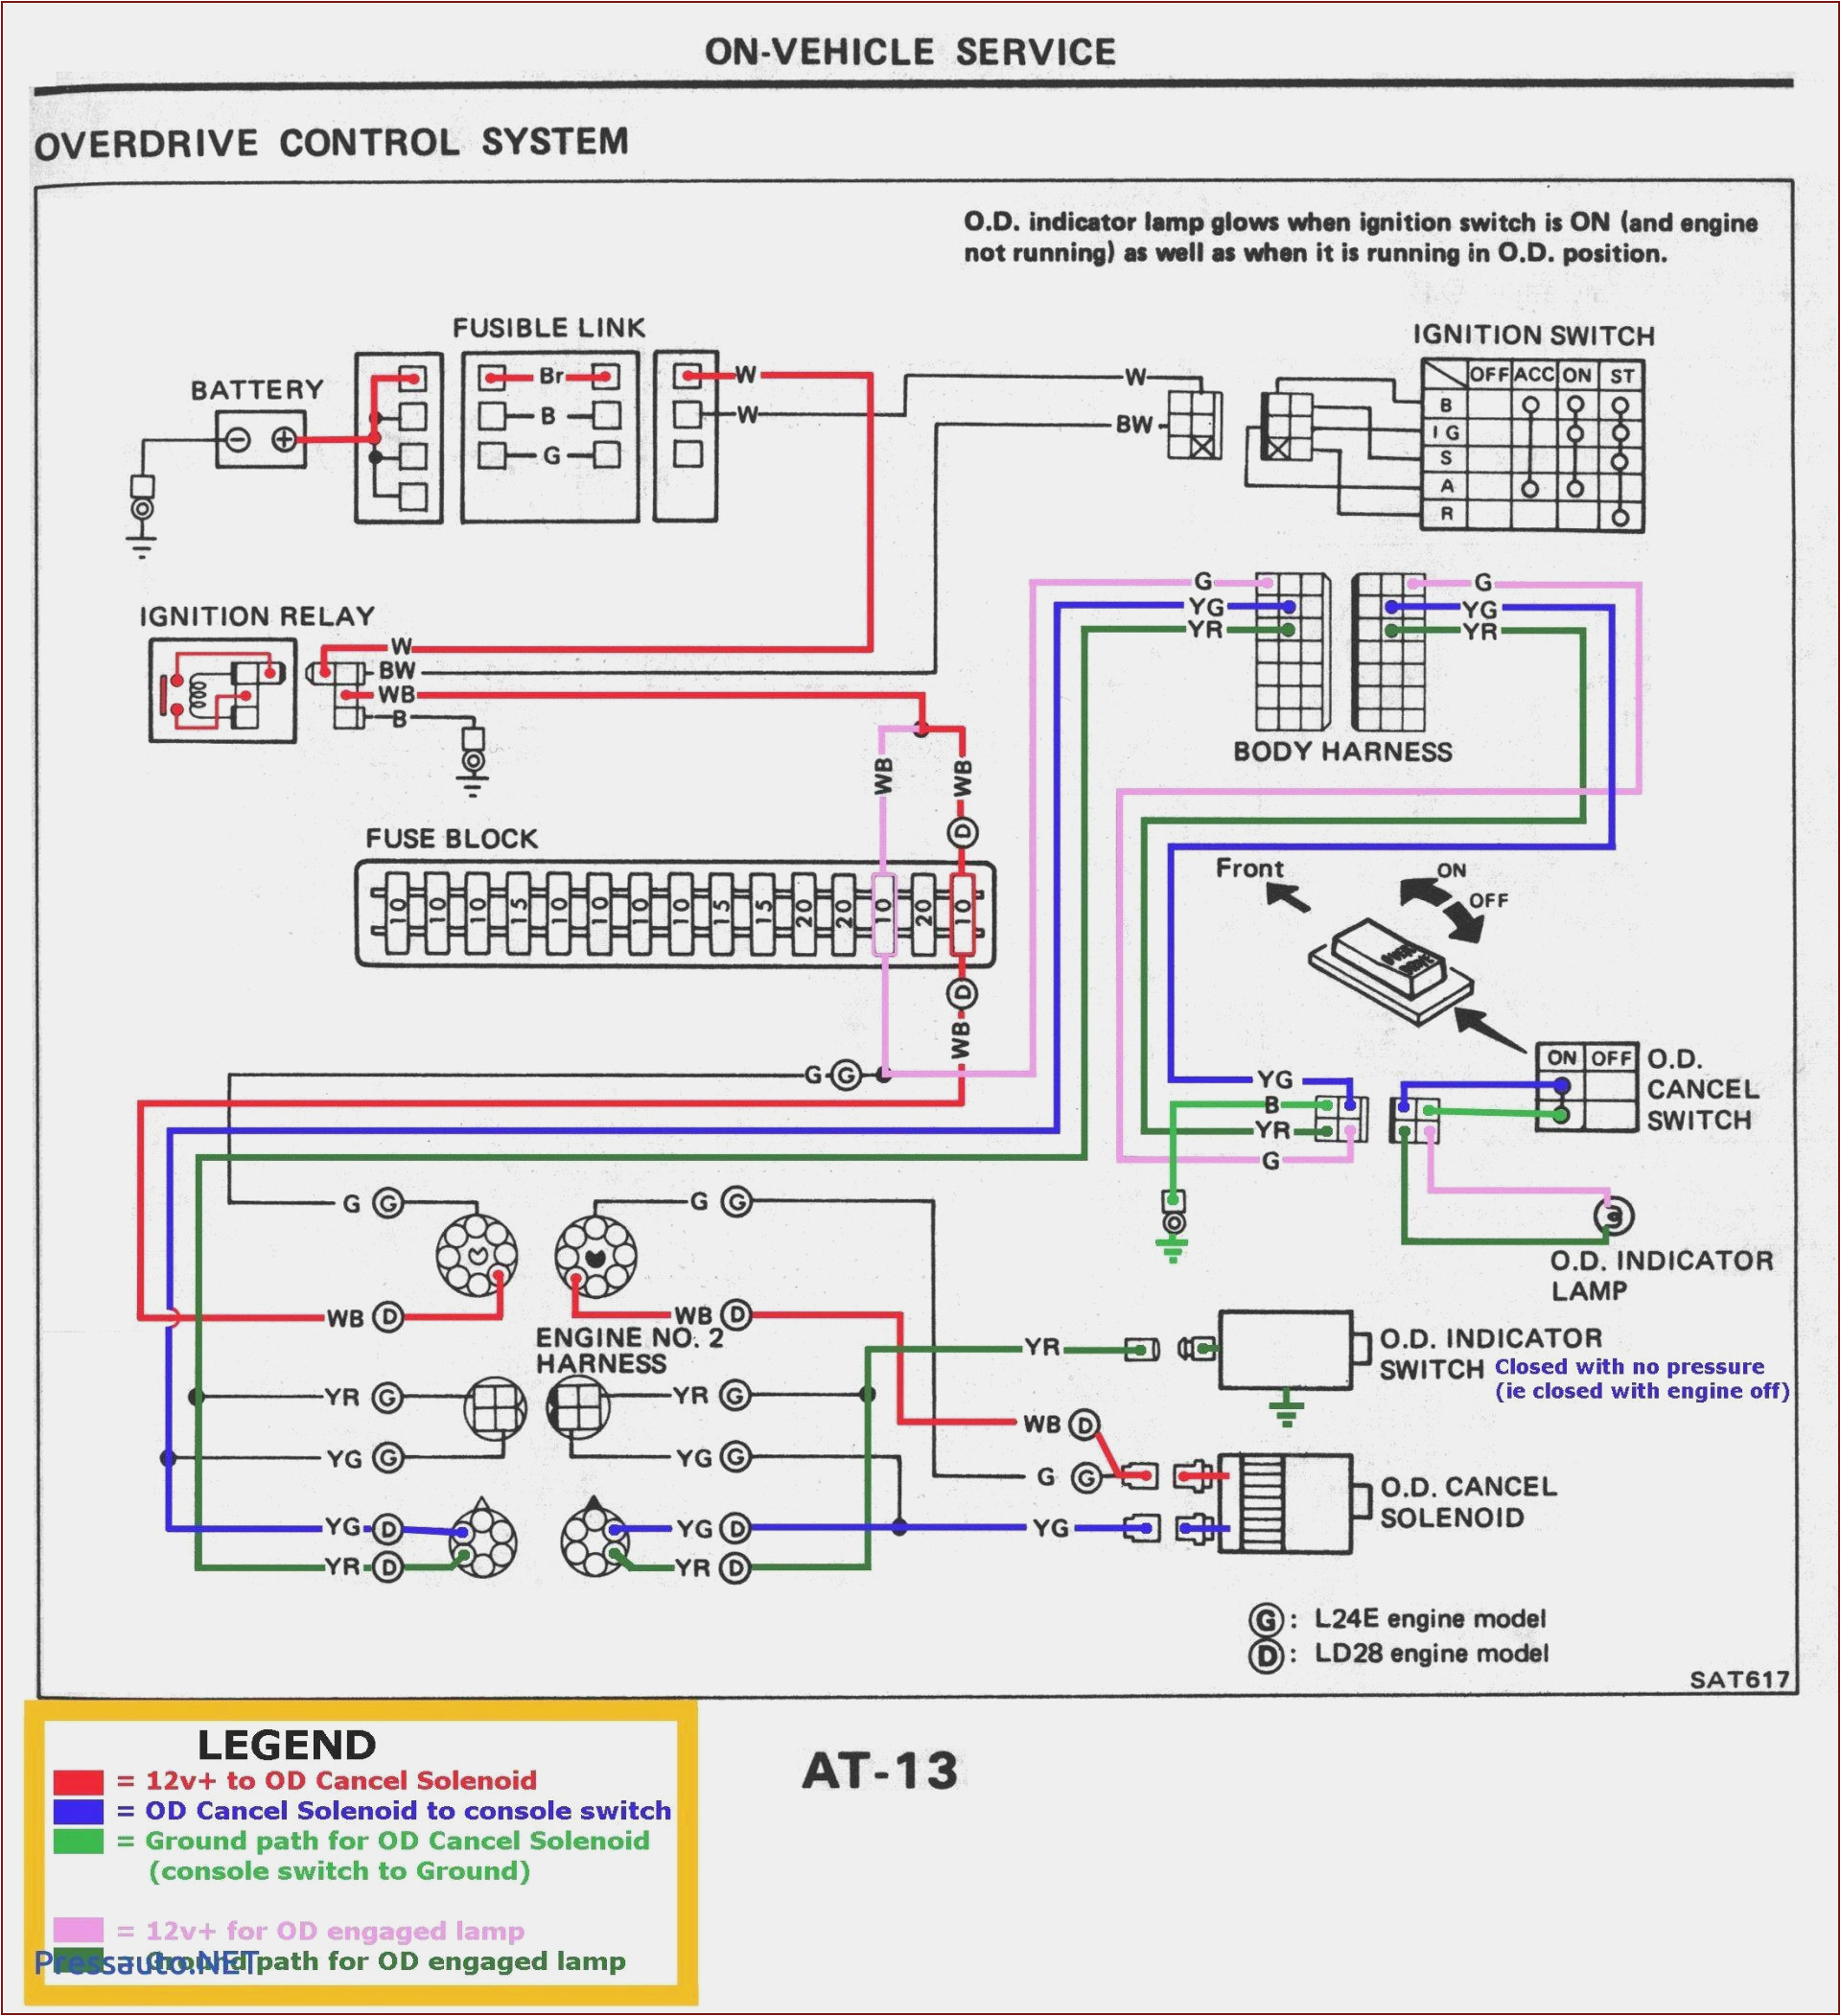 4 Wire Tail Light Wiring Diagram 3 Wire Strobe Light Wiring Diagram at Manuals Library